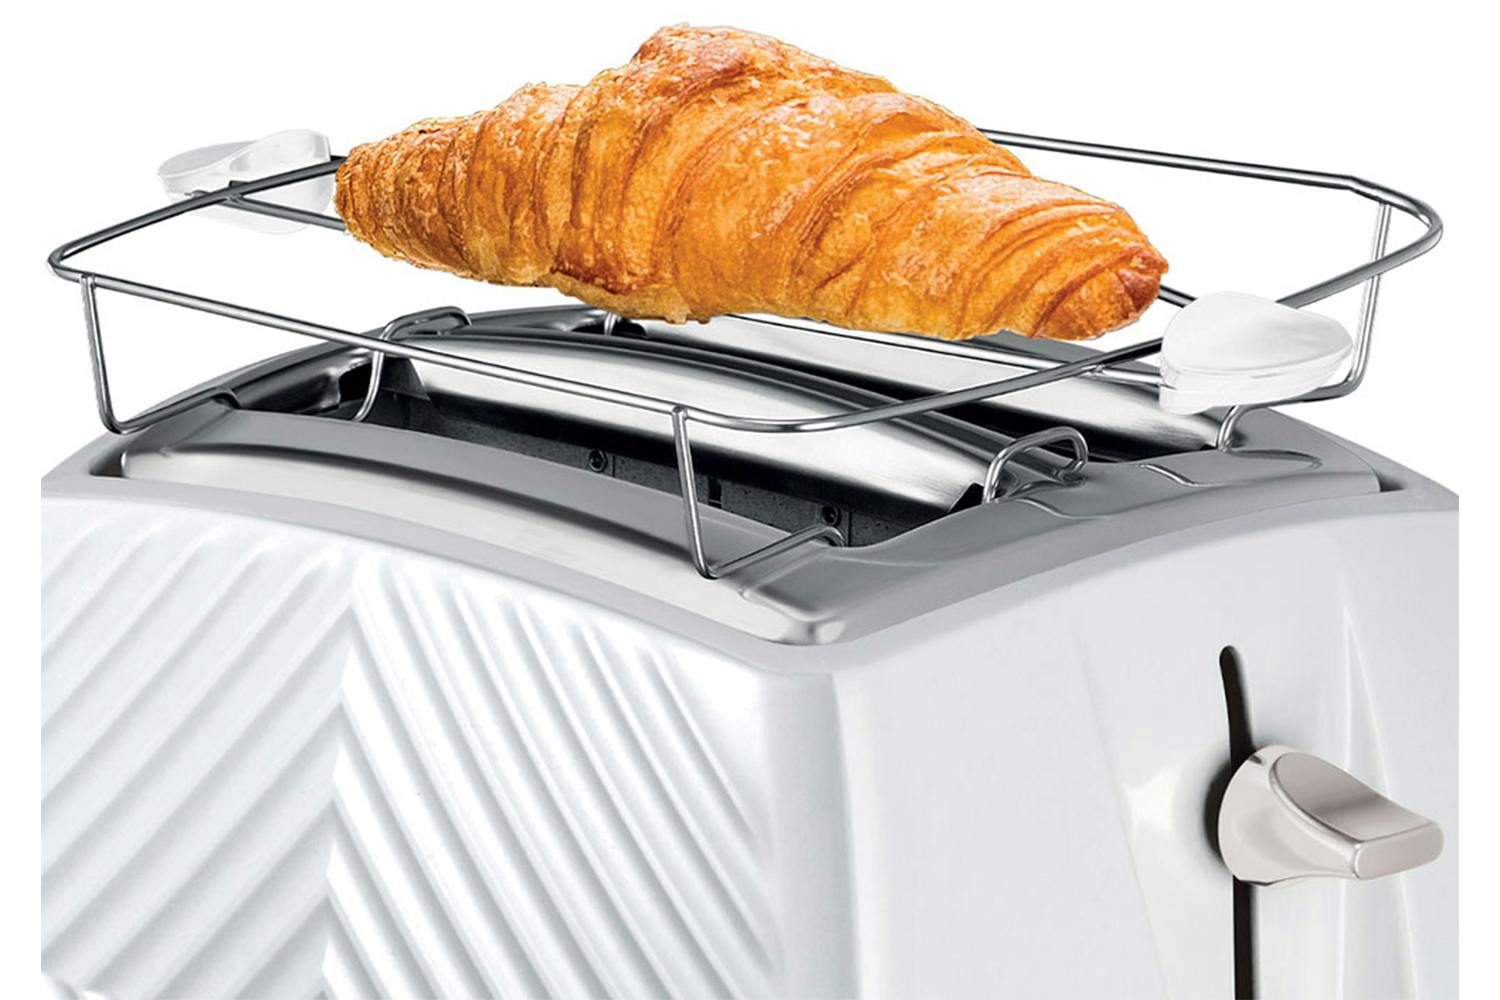 Russell Hobbs Groove Toaster review: toast just about anything